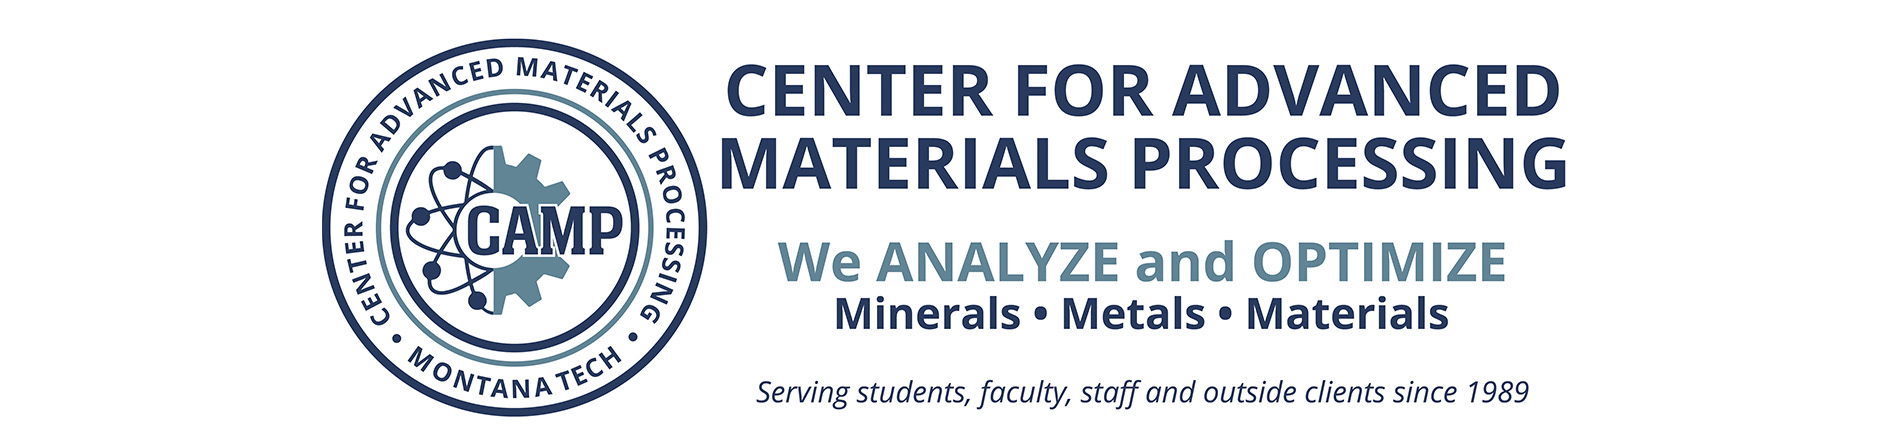 Center for Advanced Materials Processing; We analyze and optimize minerals, metals, and materials. Serving students, faculty, staff, and outside clients since 1989